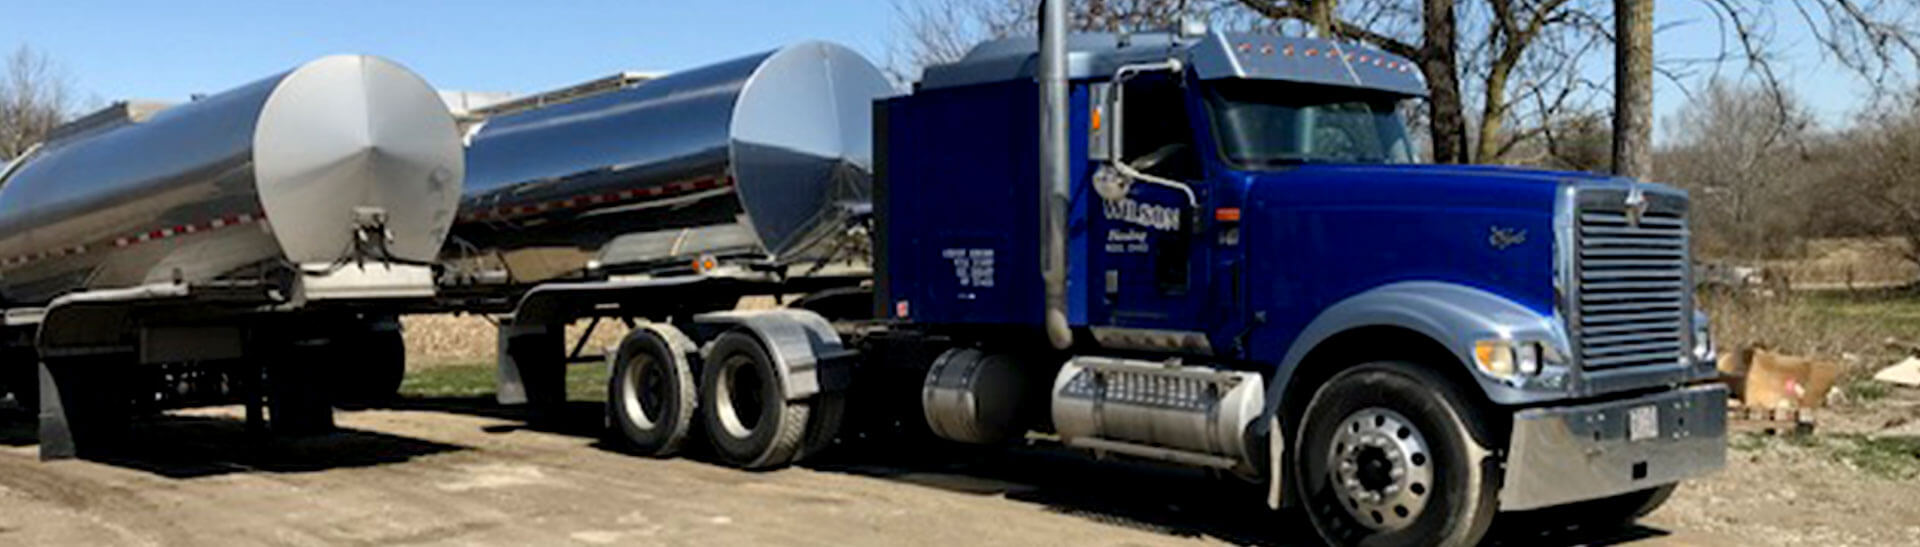 Fairfield Trucking Company and Trucking Services